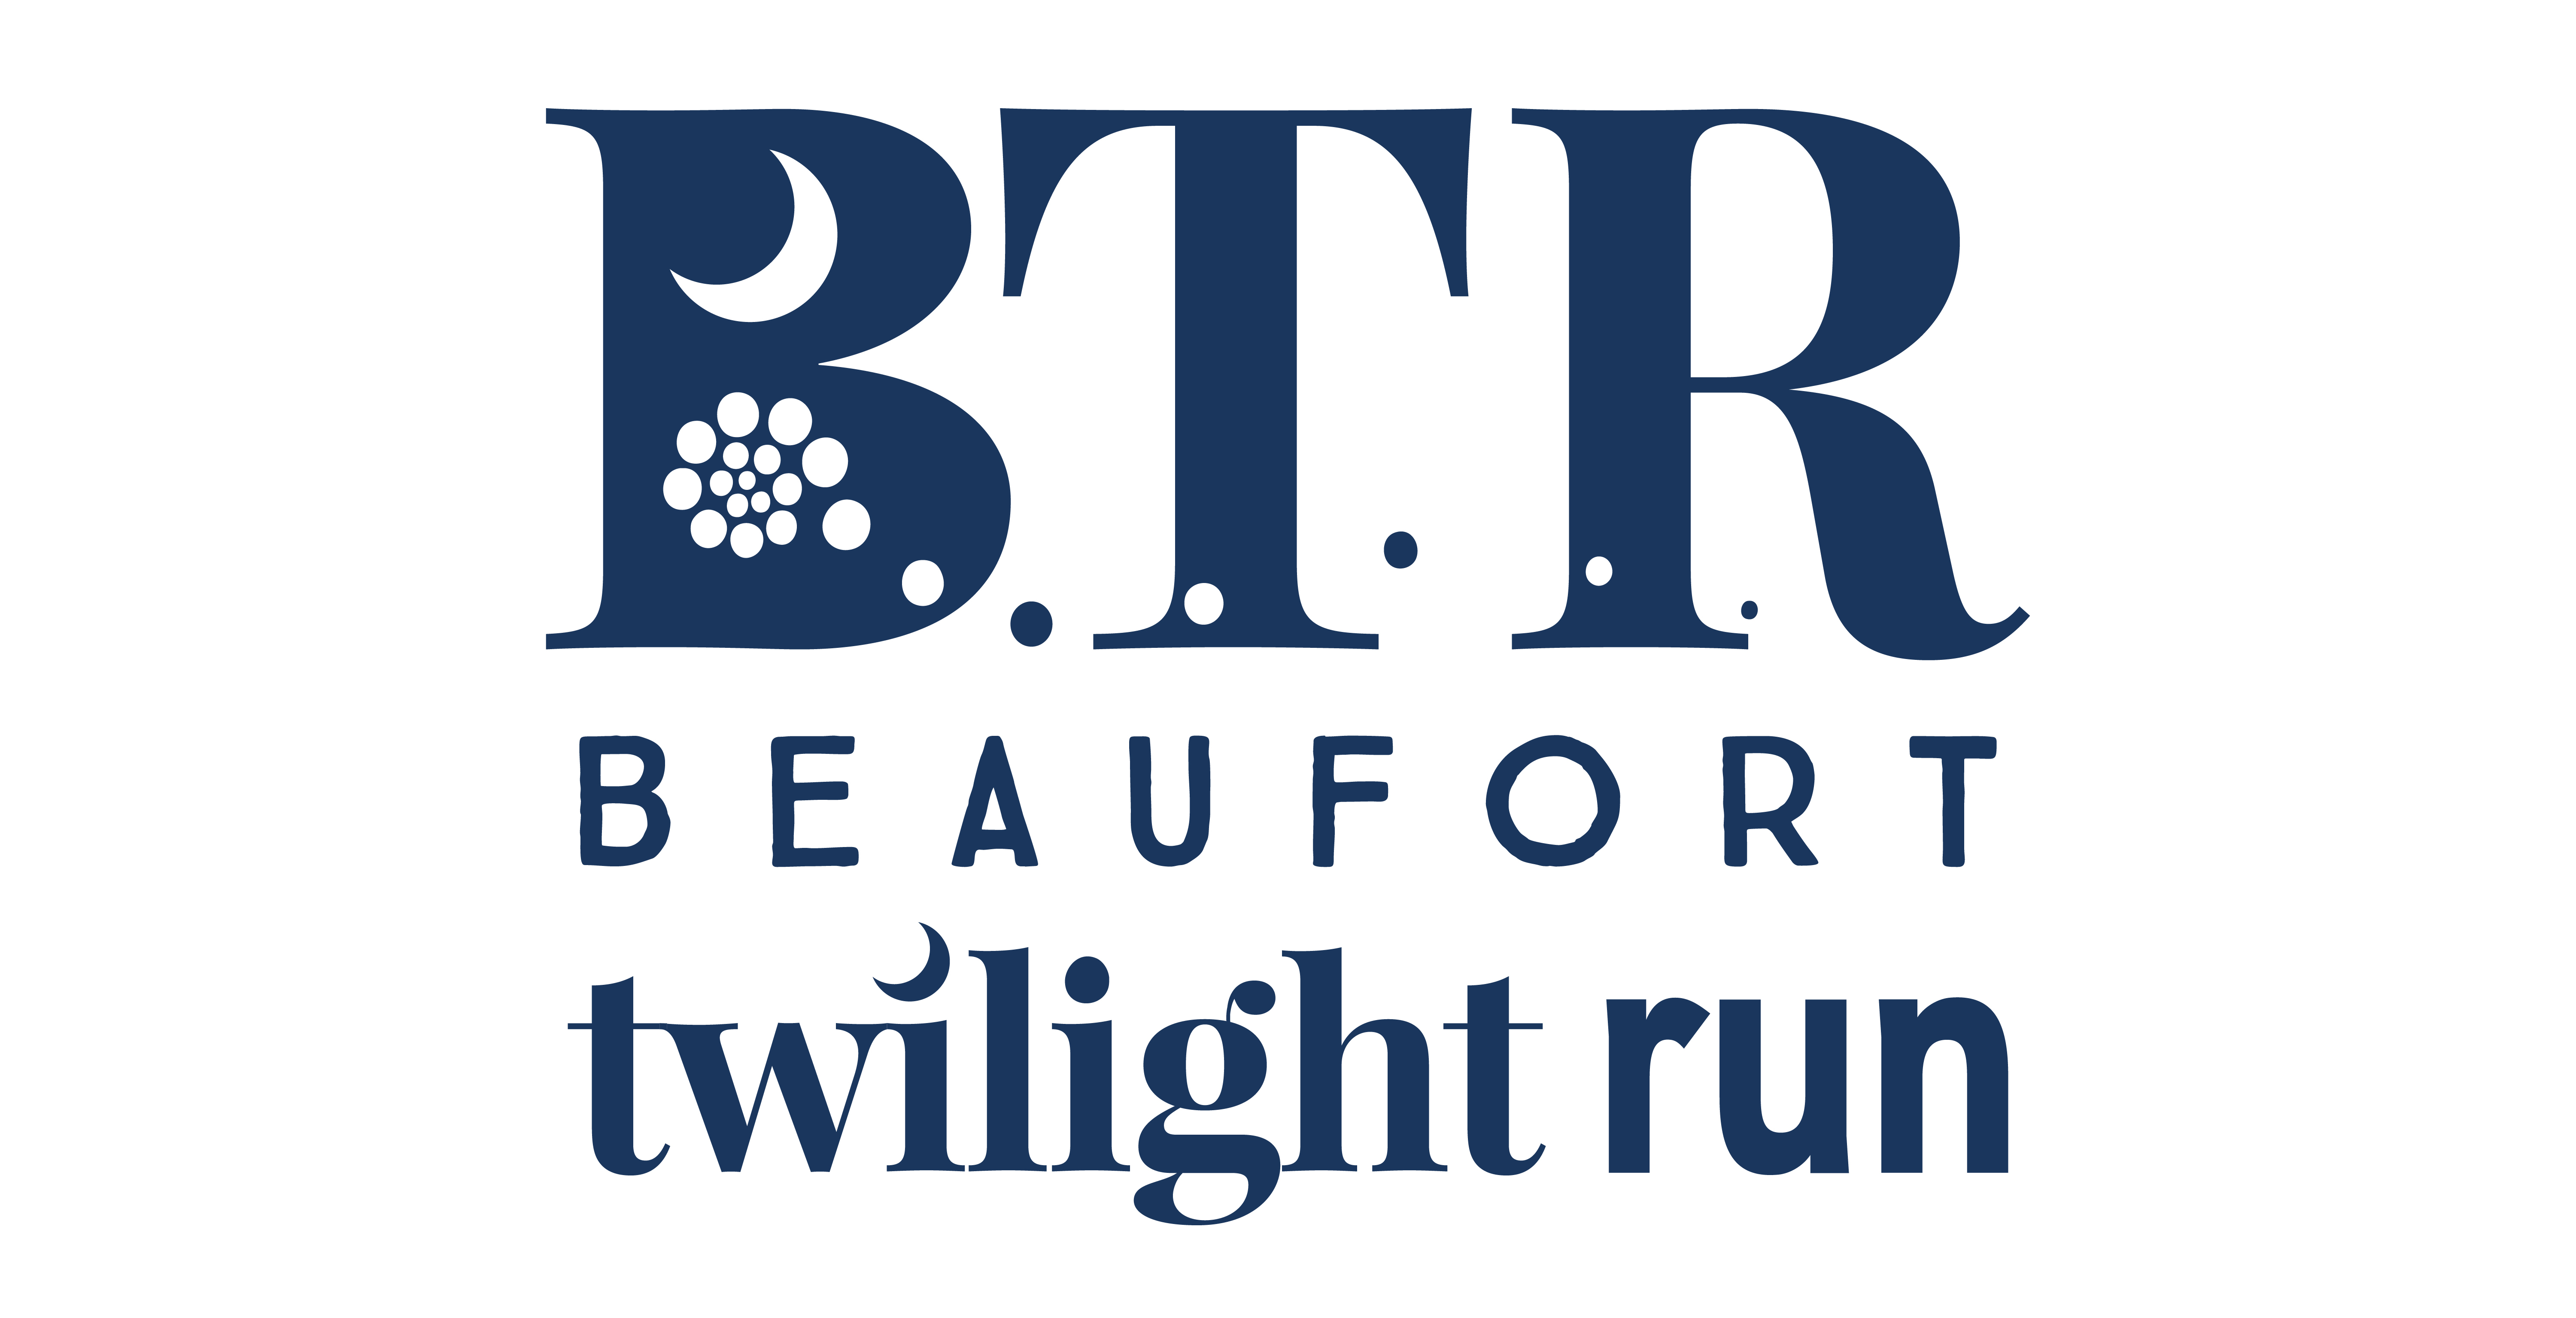 BEAUFORT TWILIGHT RUN TO HOST HUSBAND AND WIFE NATIONAL CHAMPION RUNNERS -  Beaufort Lifestyle